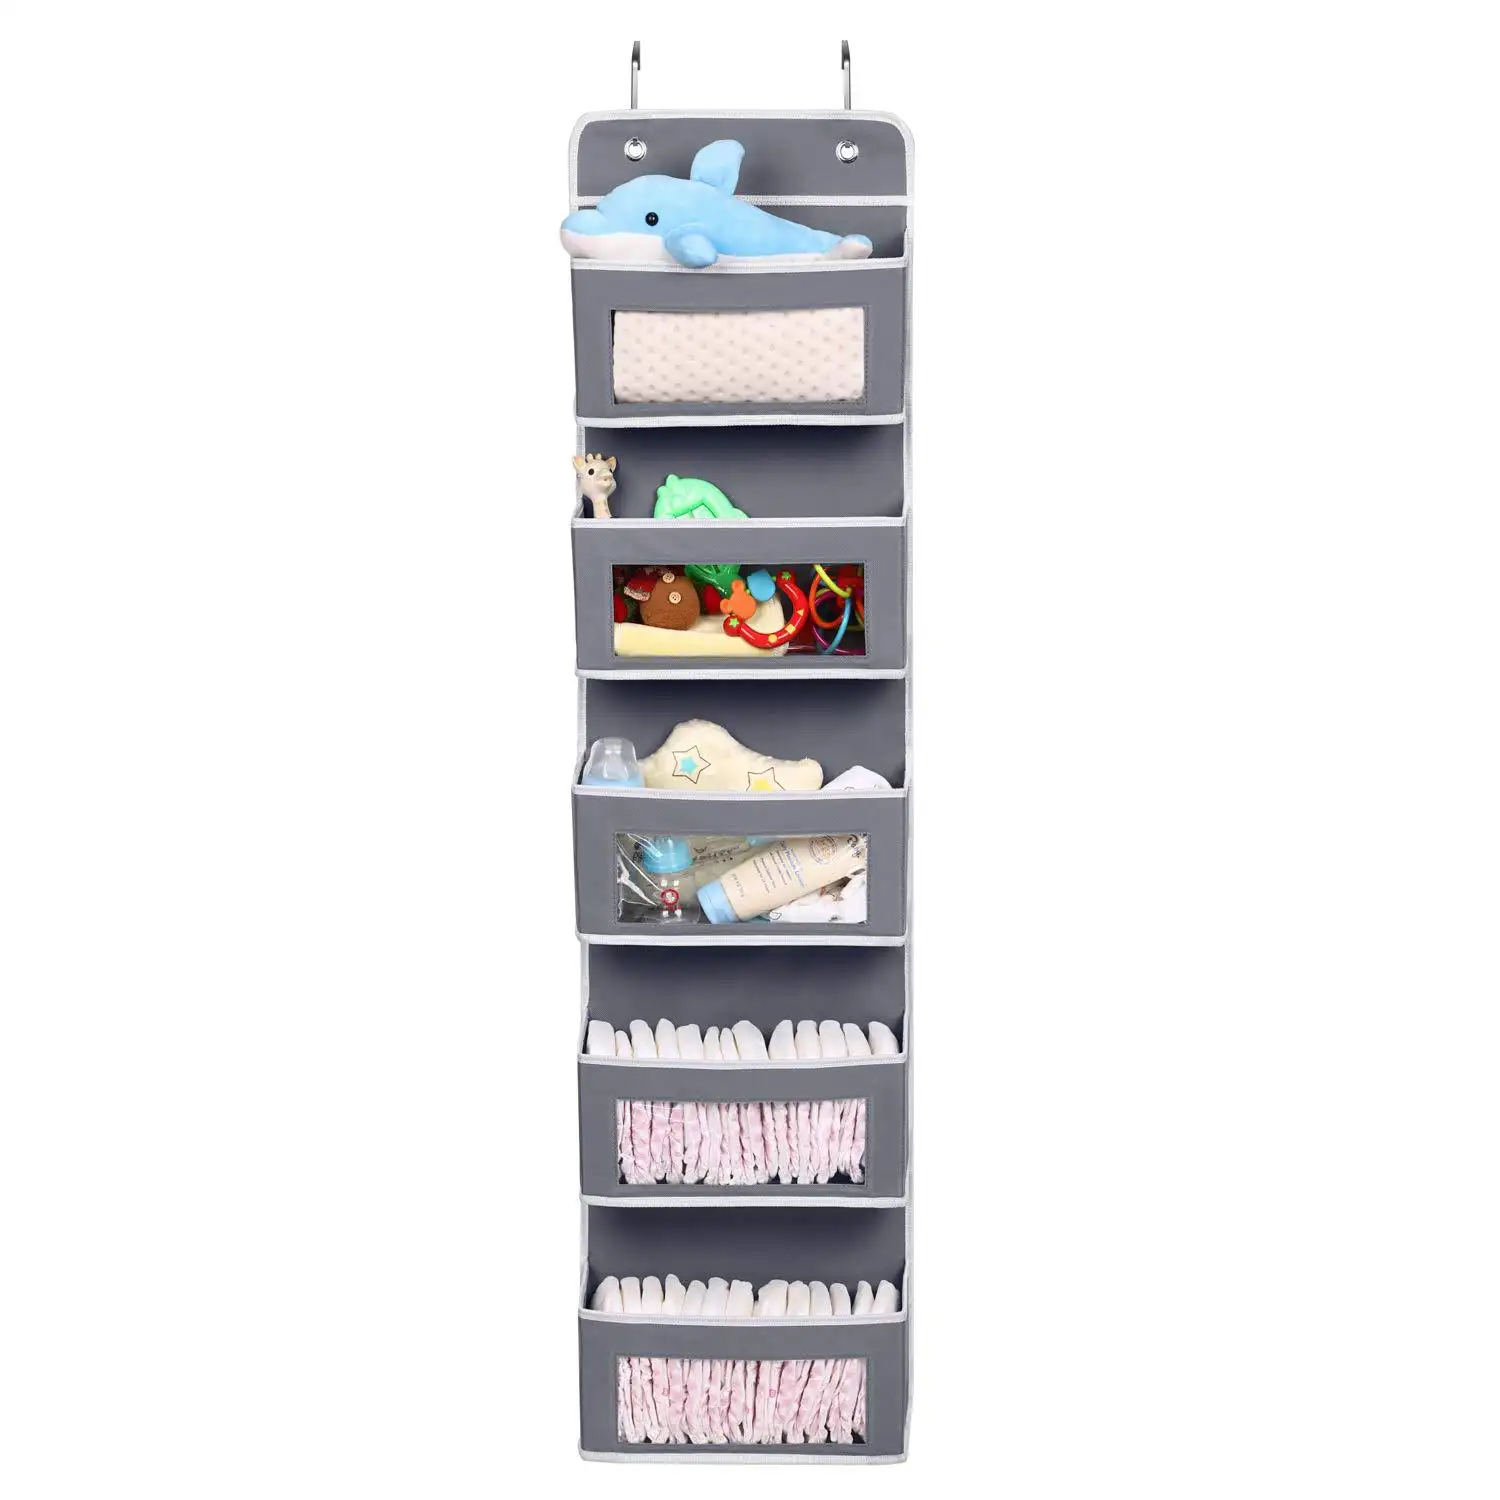 Fabric Material Hanging Wardrobe Organiser 7 Shelves 3 Drawers Ideal Hanging Clothes Storage Suitable as Hanging Storage Baskets